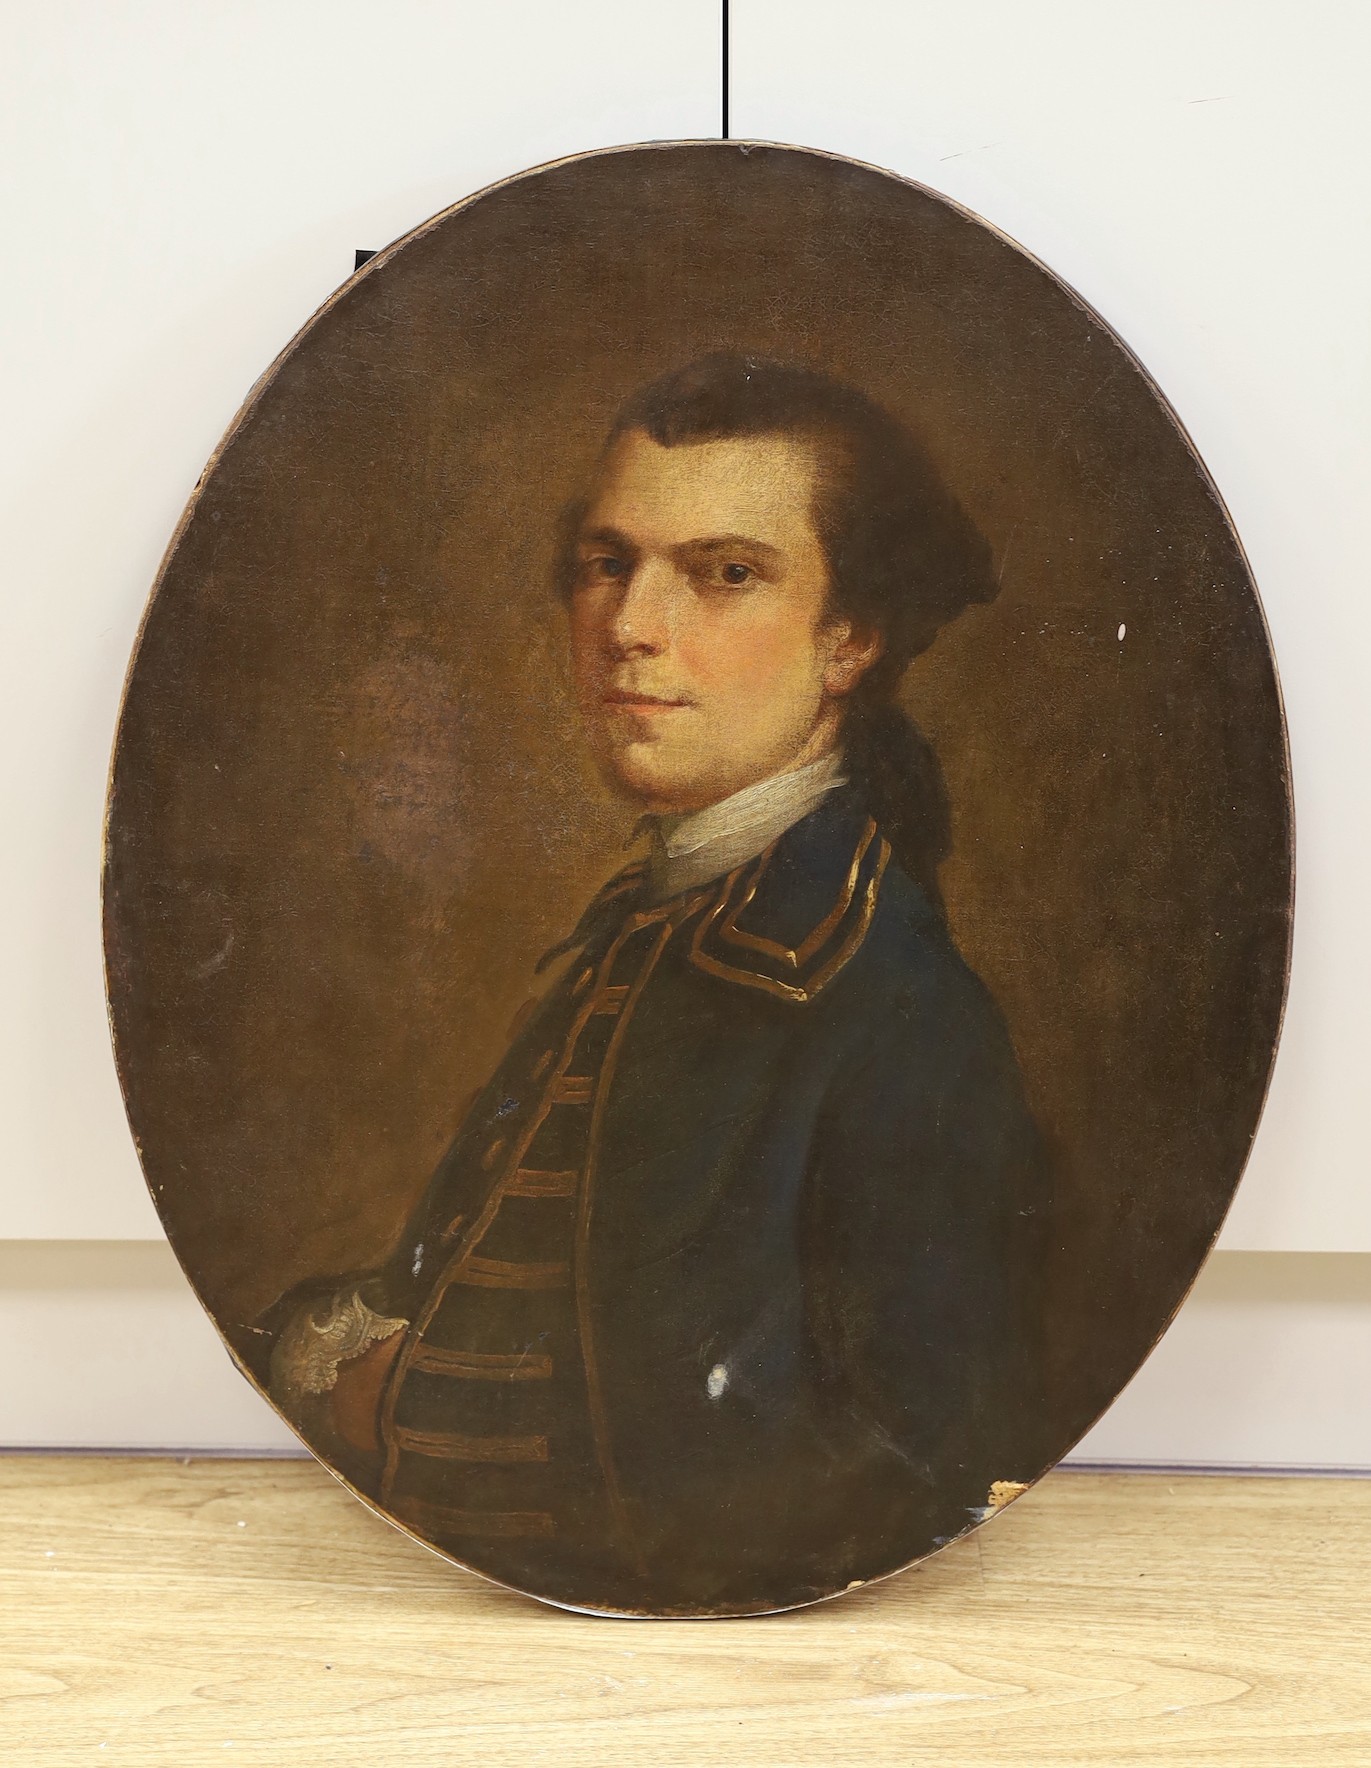 English School c.1800, oil on canvas, Portrait of a Naval officer, 70 x 56cm, oval, unframed